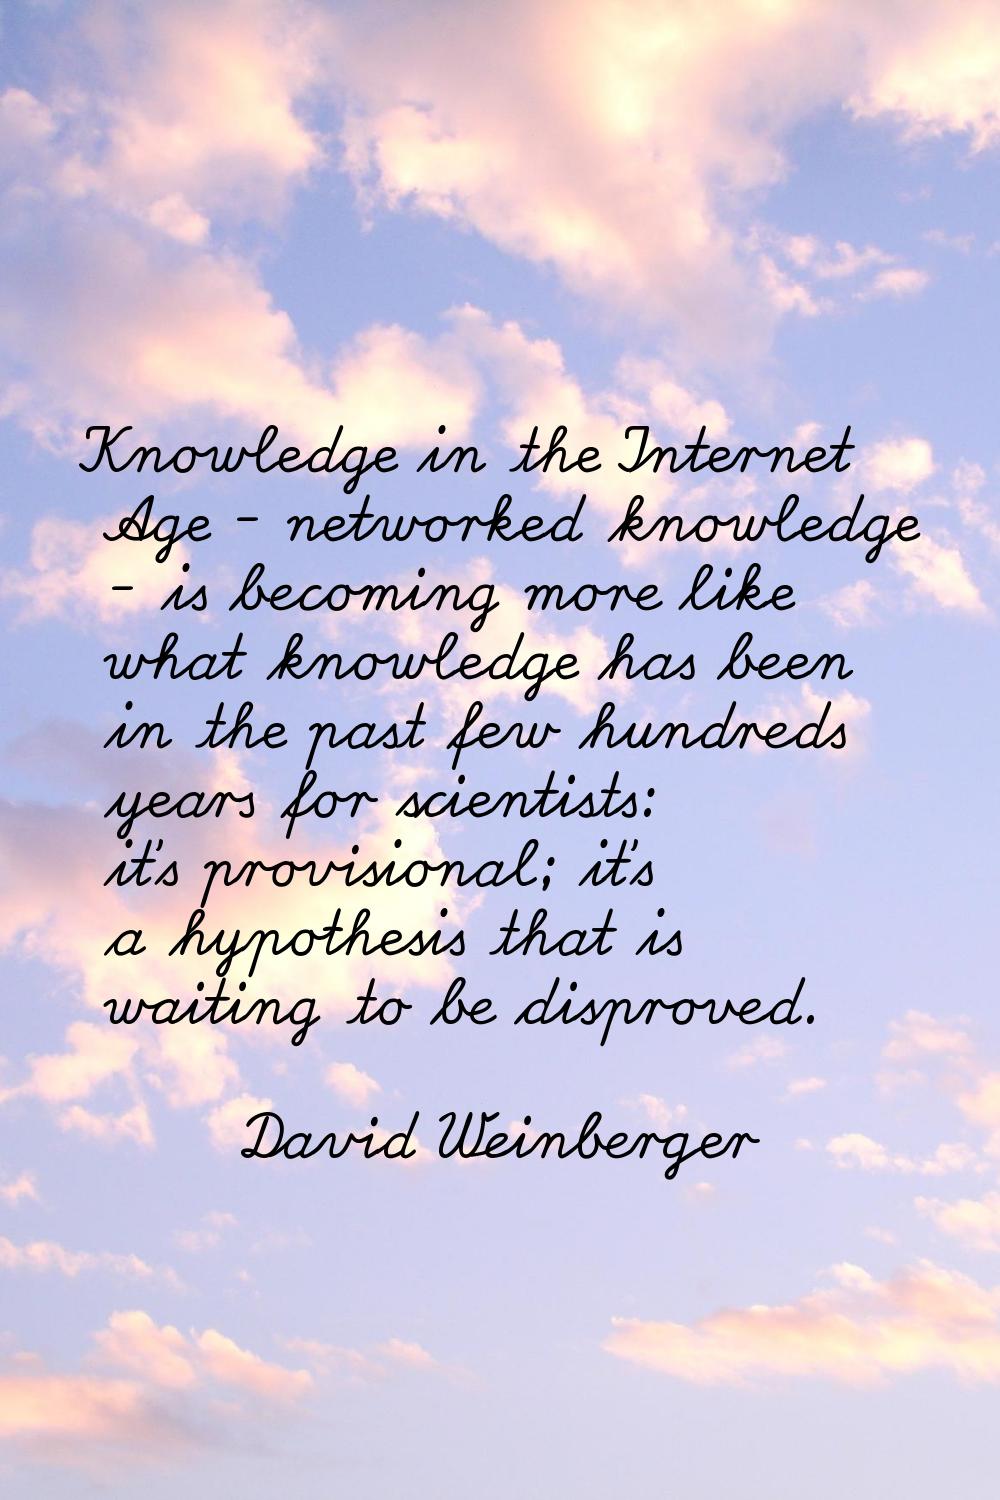 Knowledge in the Internet Age - networked knowledge - is becoming more like what knowledge has been